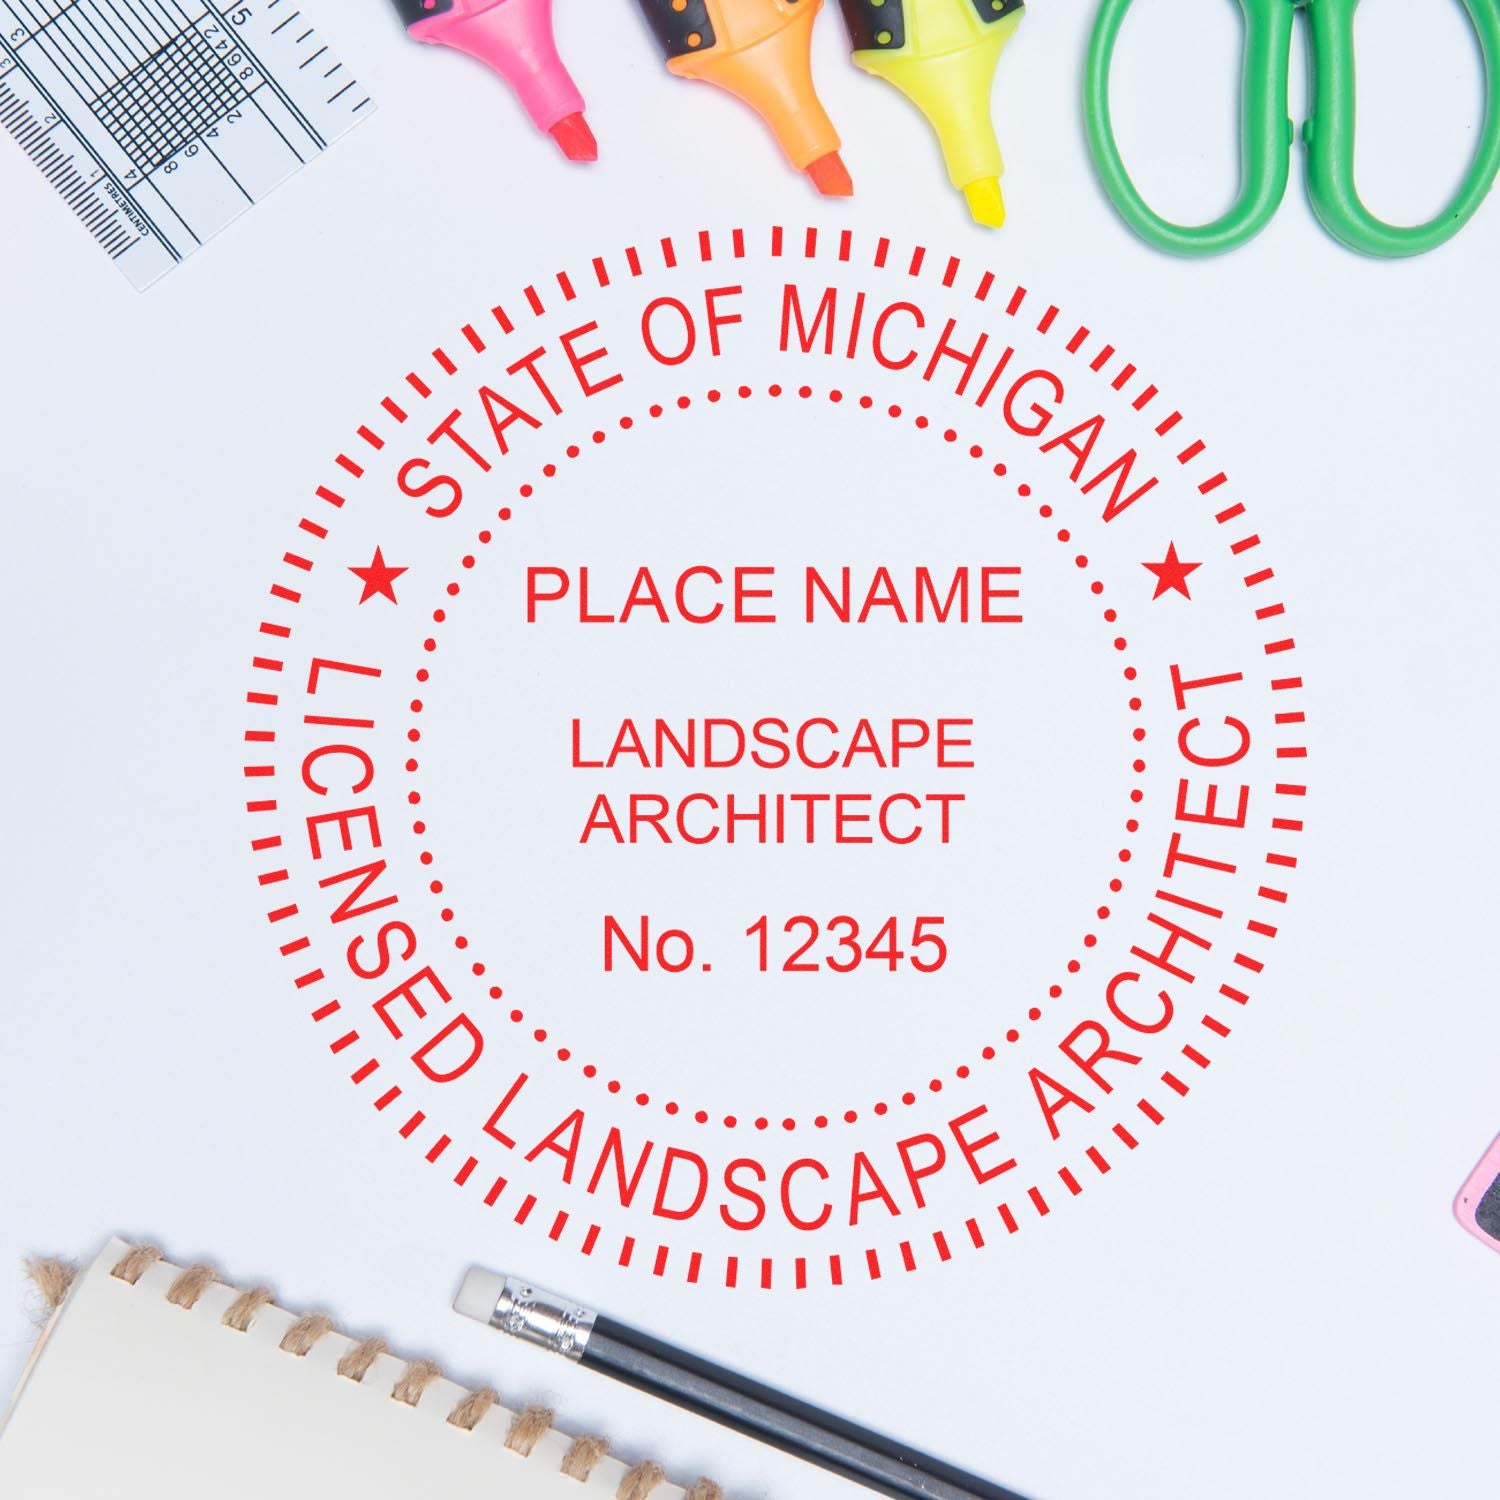 A photograph of the Digital Michigan Landscape Architect Stamp stamp impression reveals a vivid, professional image of the on paper.